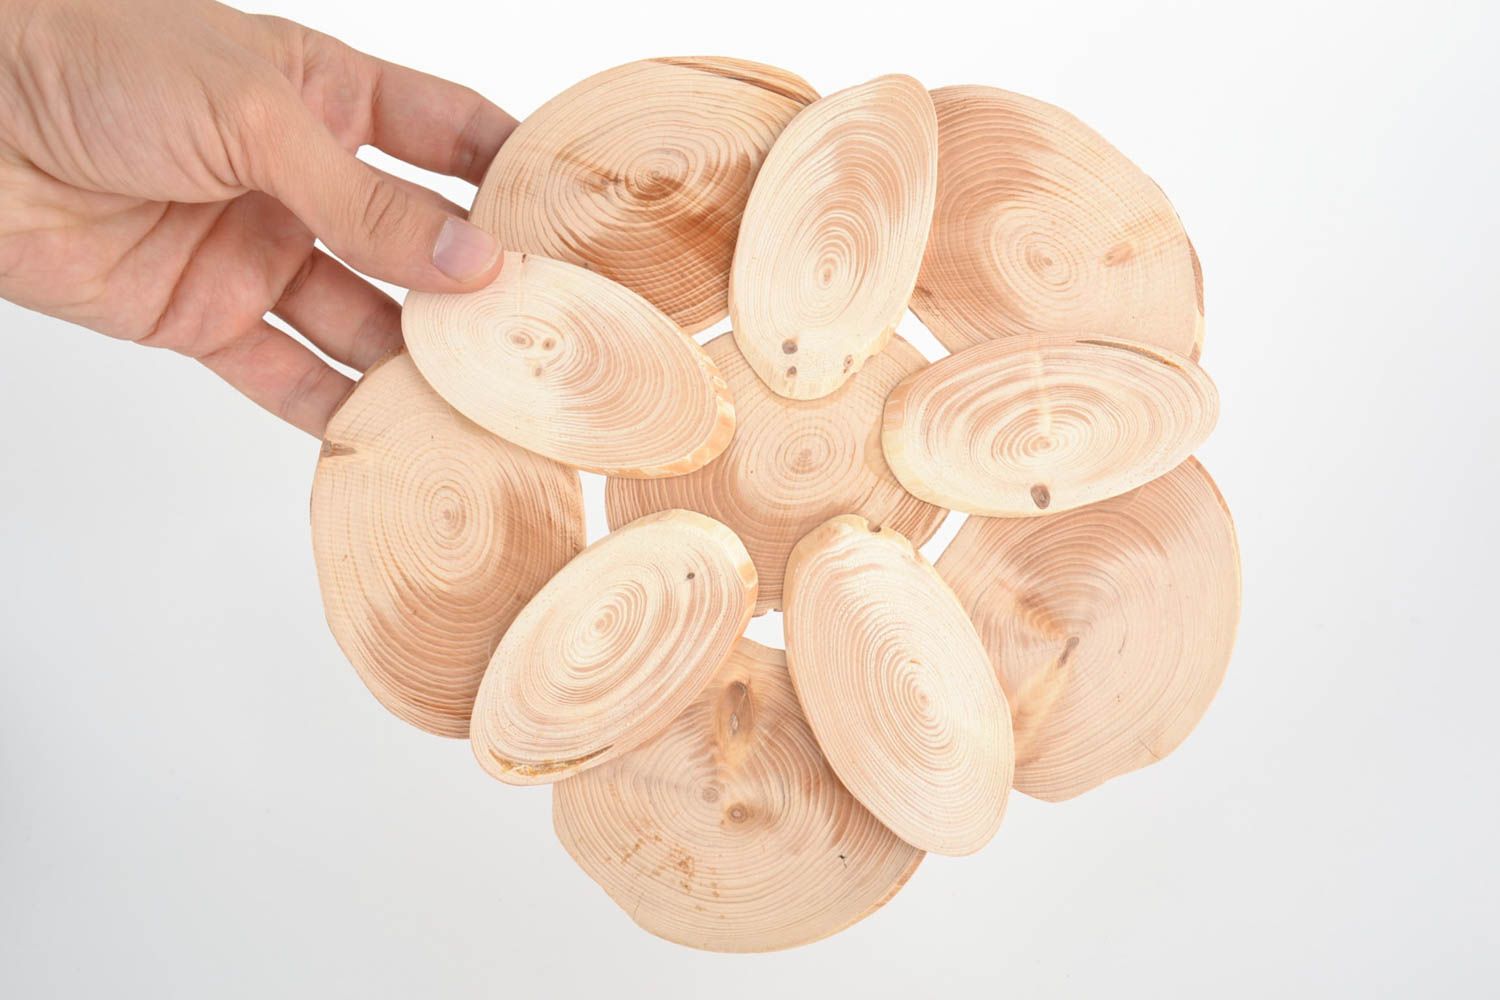 Handmade wooden round stand for pots and other hot dishes interior decor ideas photo 3